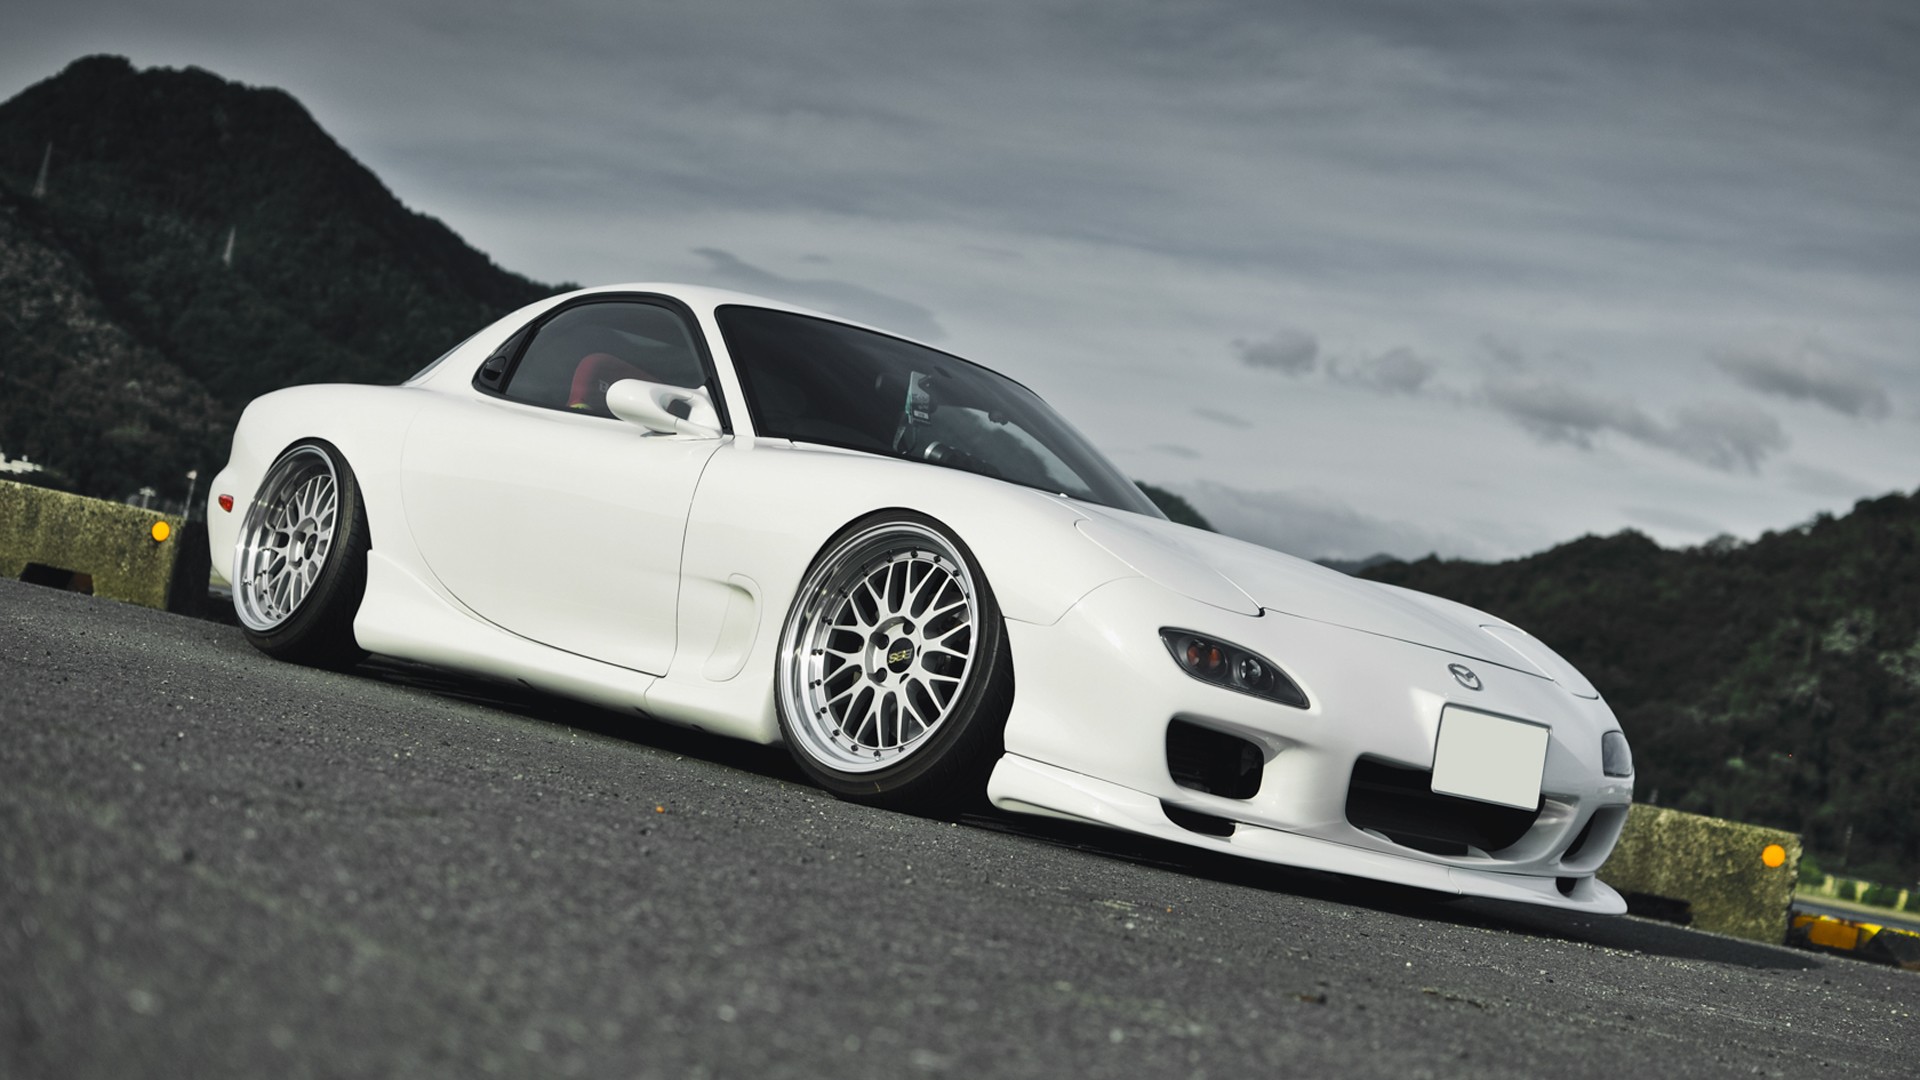 Mazda Rx7 Wallpaper S High Resolution Image For